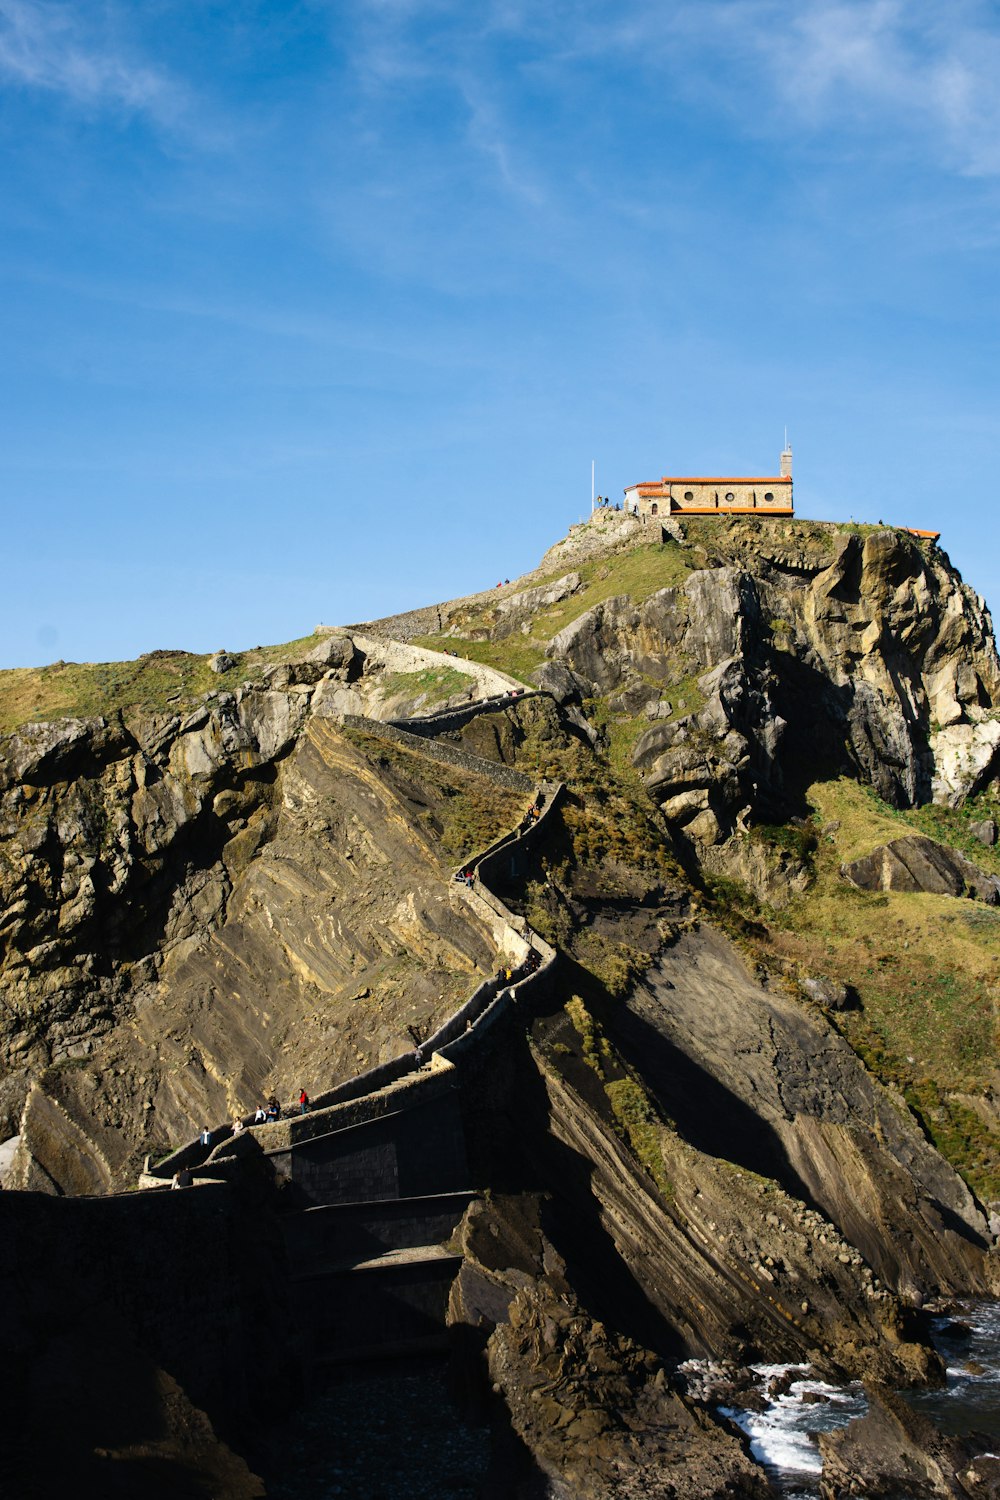 a house on top of a cliff by the ocean